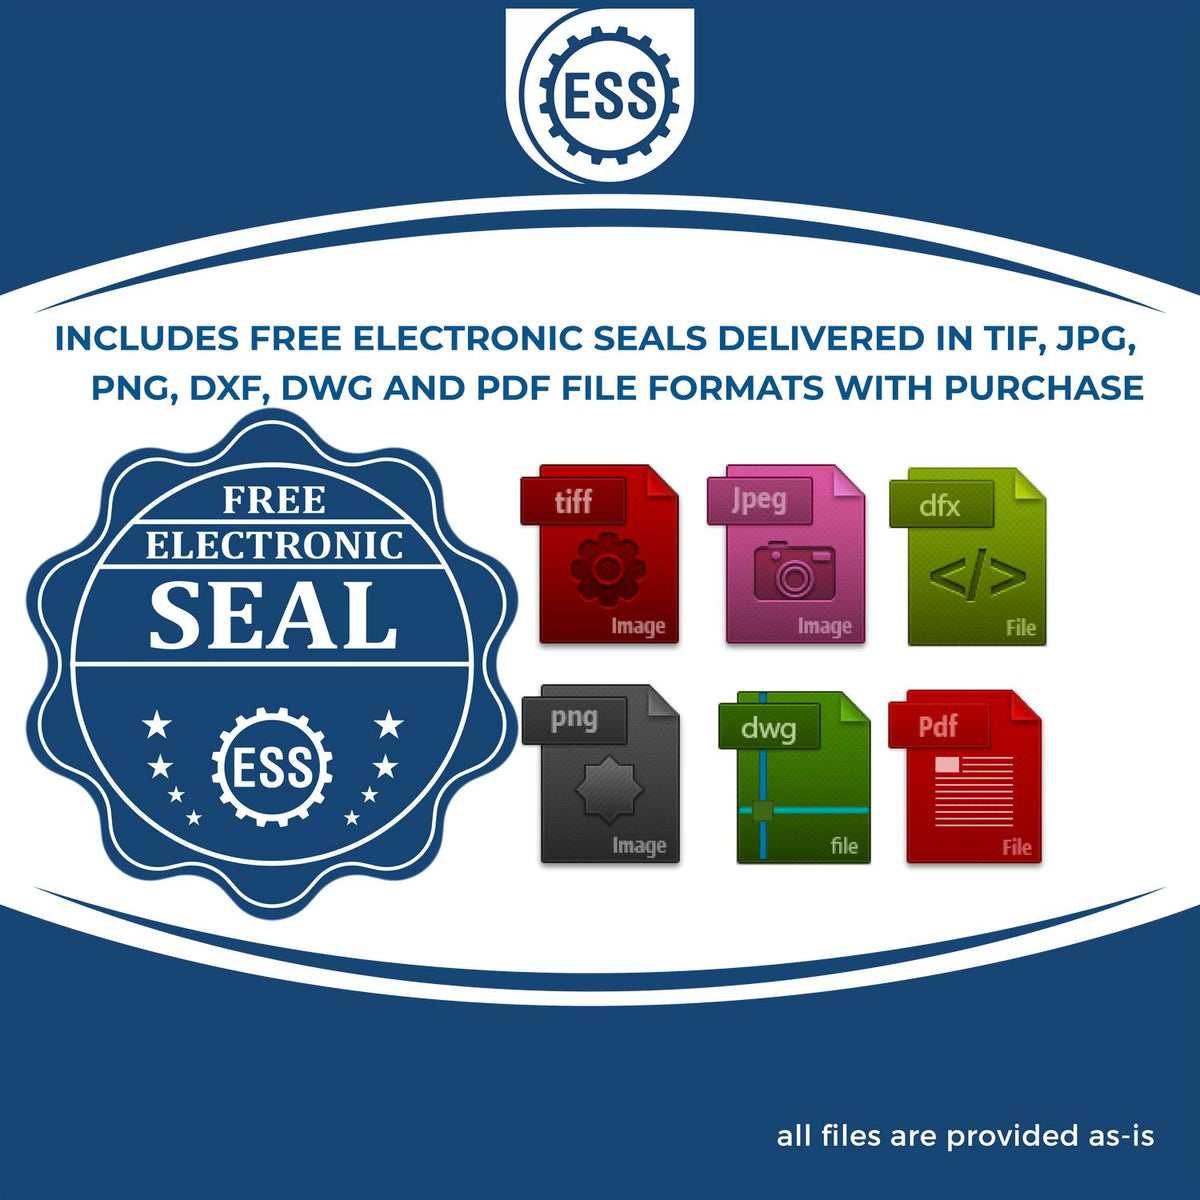 An infographic for the free electronic seal for the Slim Pre-Inked West Virginia Land Surveyor Seal Stamp illustrating the different file type icons such as DXF, DWG, TIF, JPG and PNG.